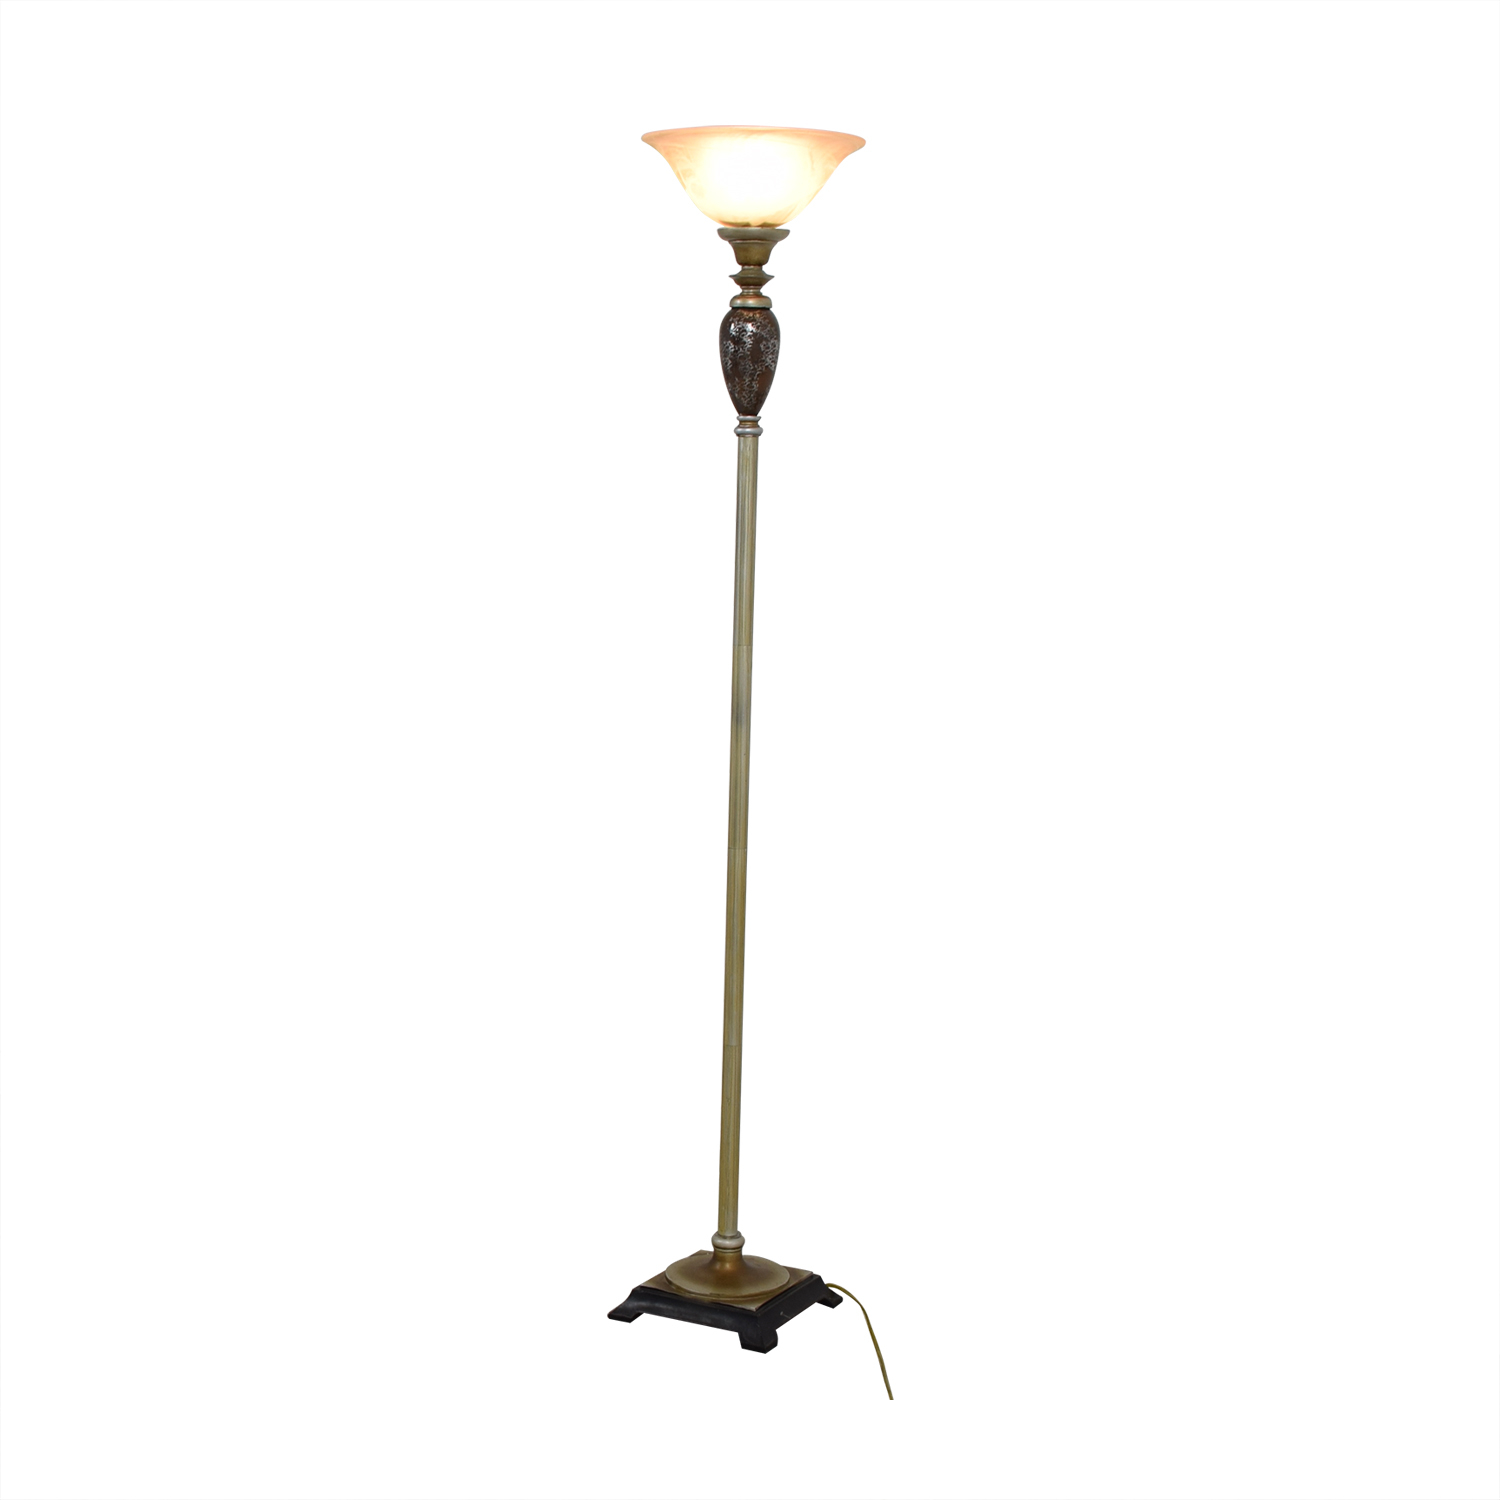 55 Off Bed Bath Beyond Bed Bath And Beyond Torchiere Floor Lamp Decor pertaining to sizing 1500 X 1500